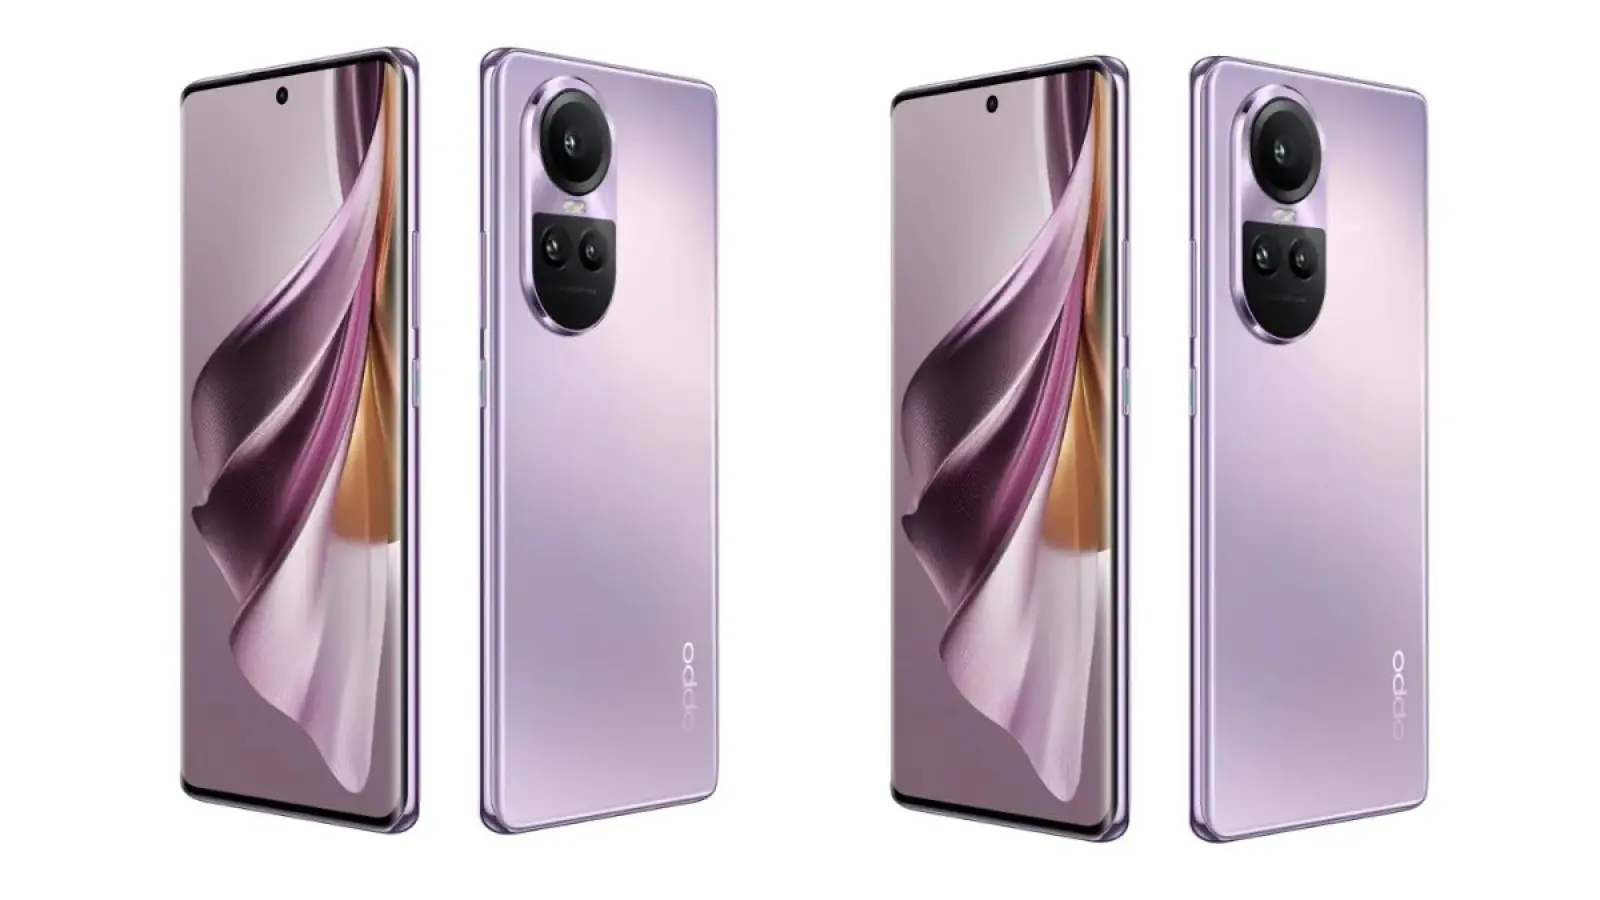 Oppo's powerful 5G phone with 50MP camera, 12GB RAM and 80W fast charging becomes cheaper, know the new price and features